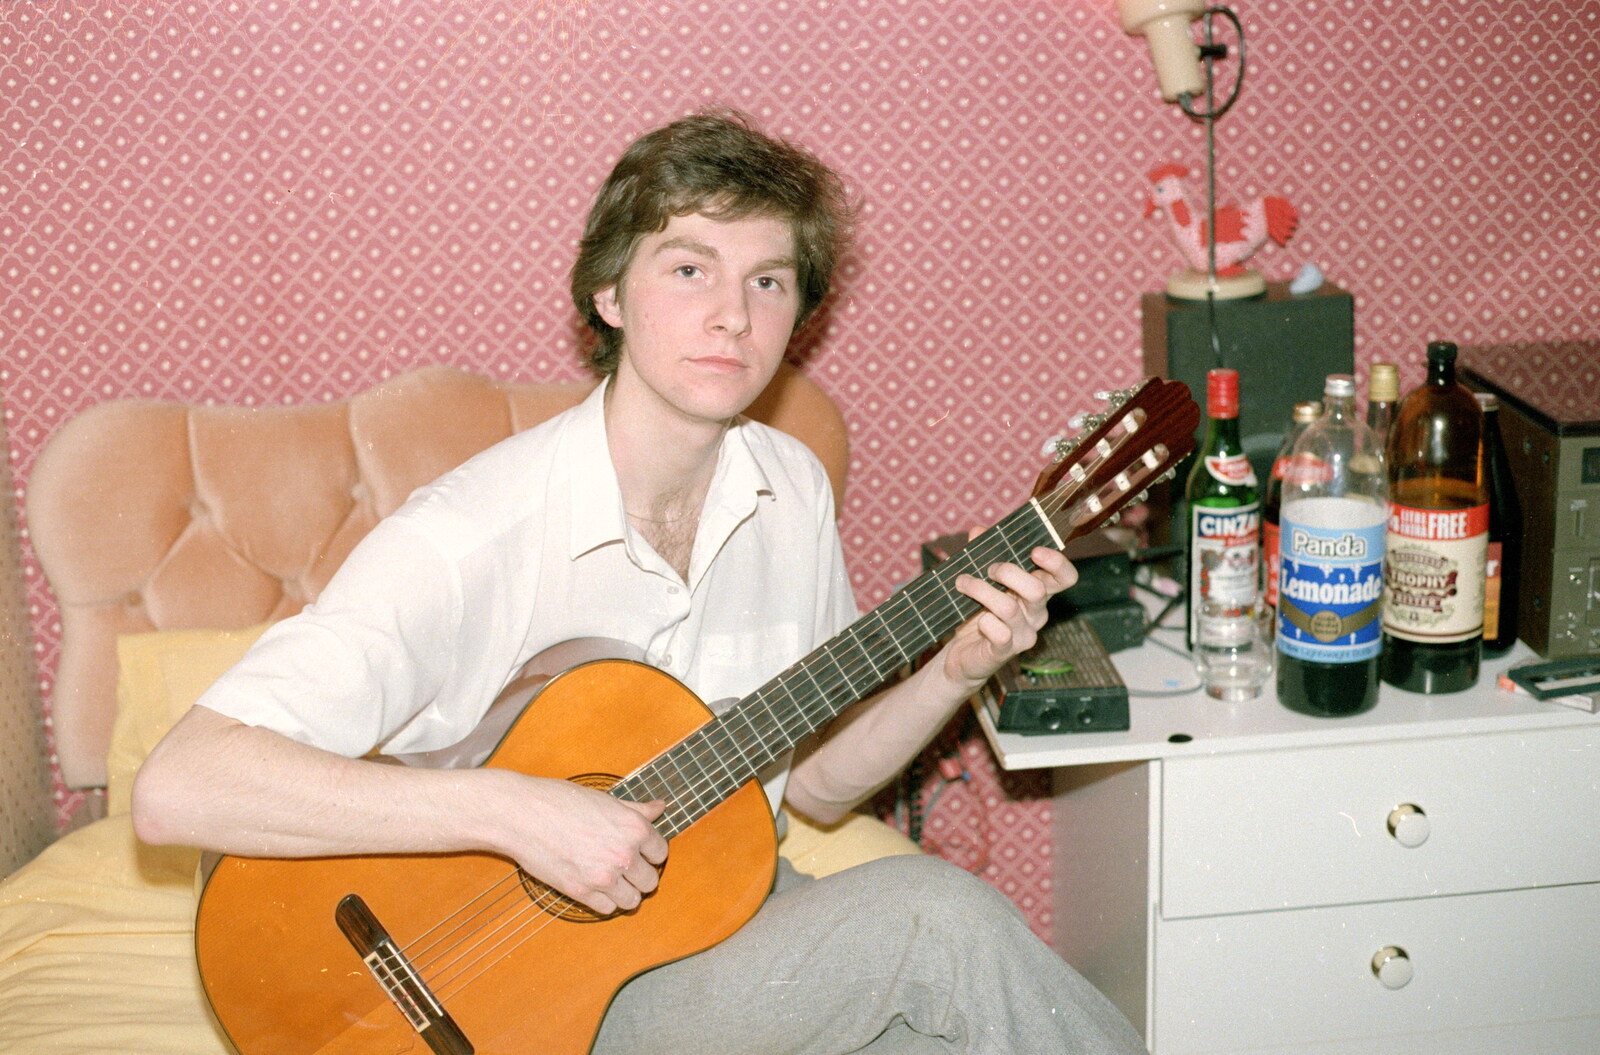 Sean lays down a F major seventh from Ford Cottage Pre-Christmas, Barton on Sea, Hampshire - 19th December 1985